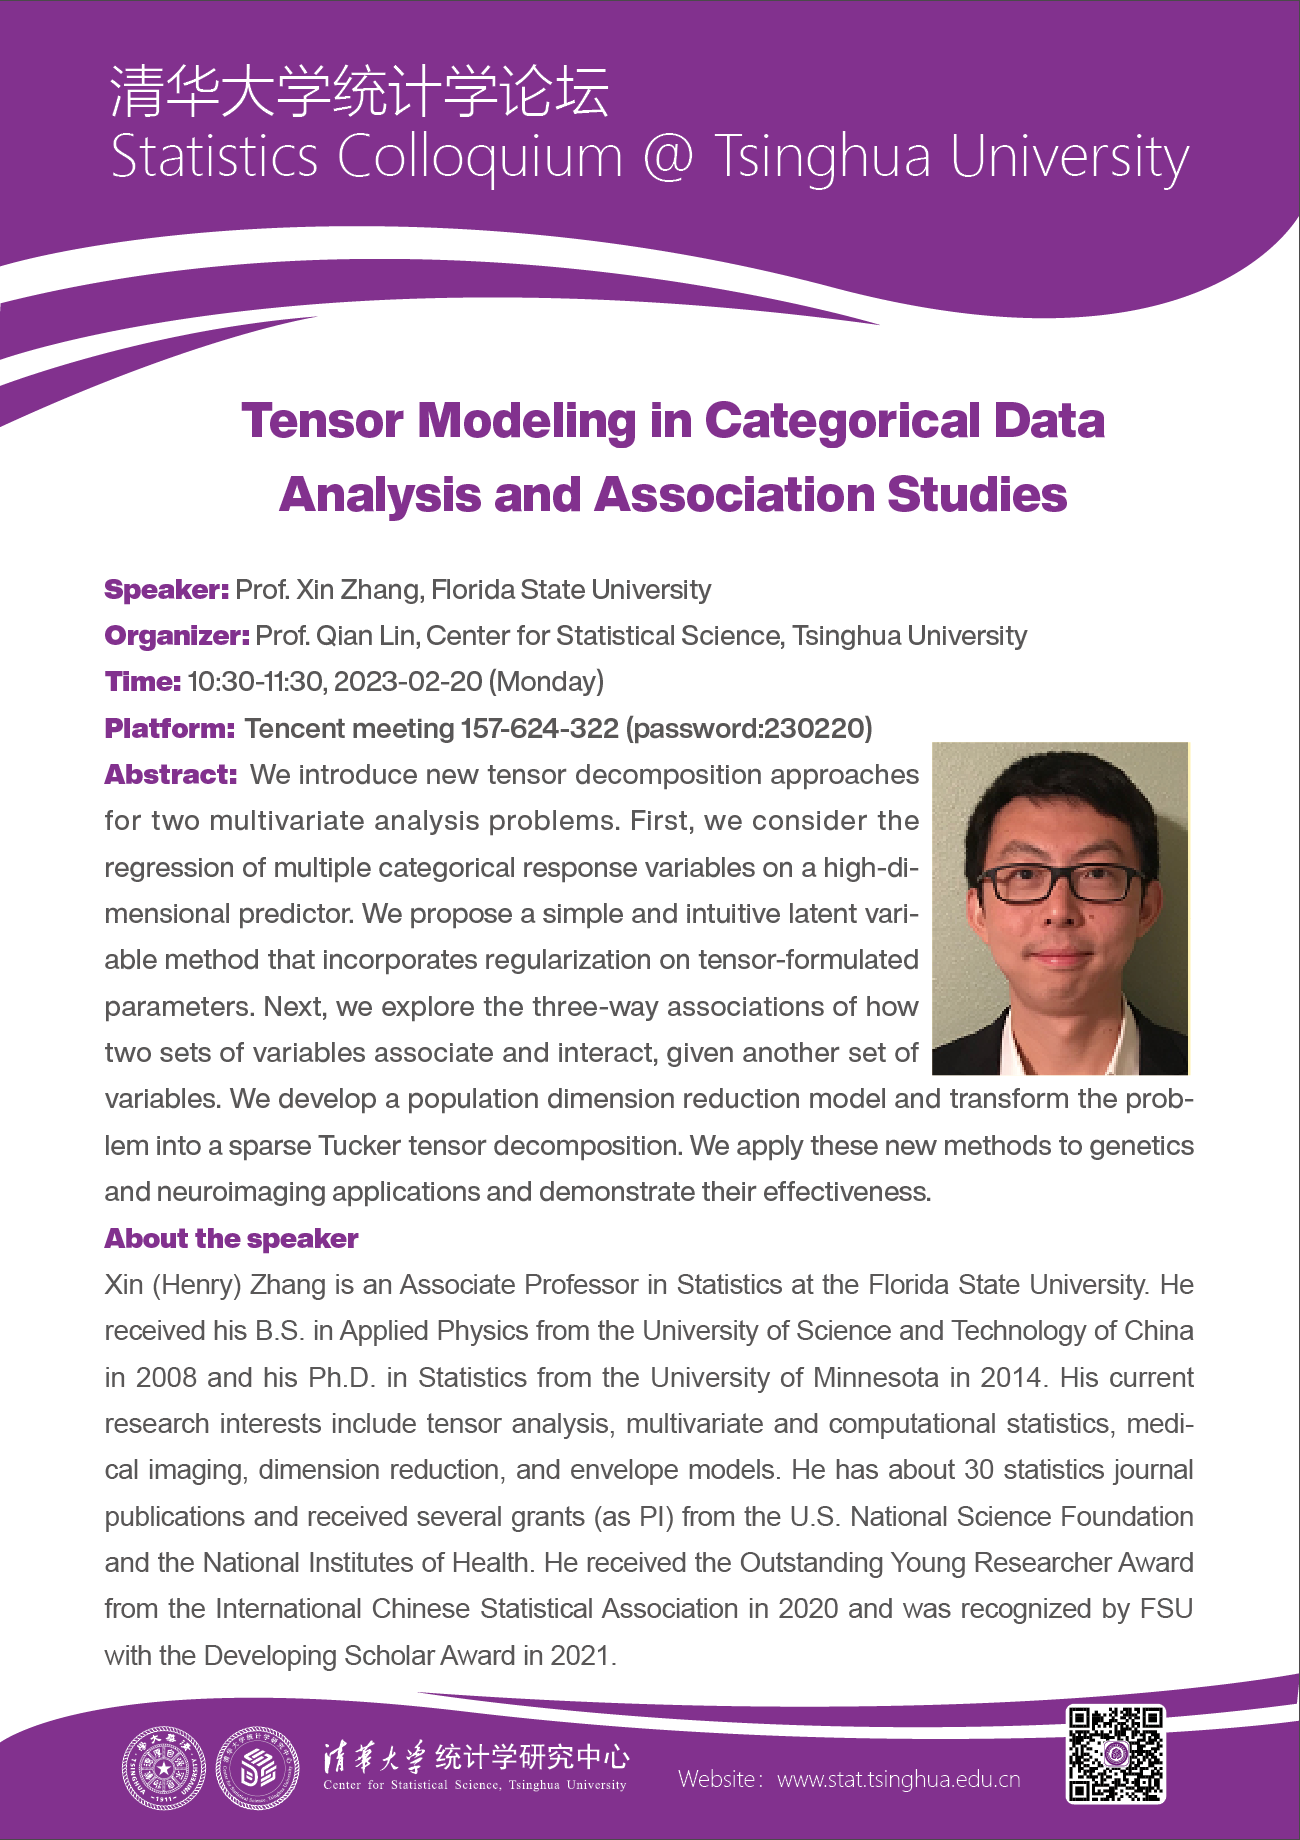 Tensor modeling in categorical data analysis and association studies